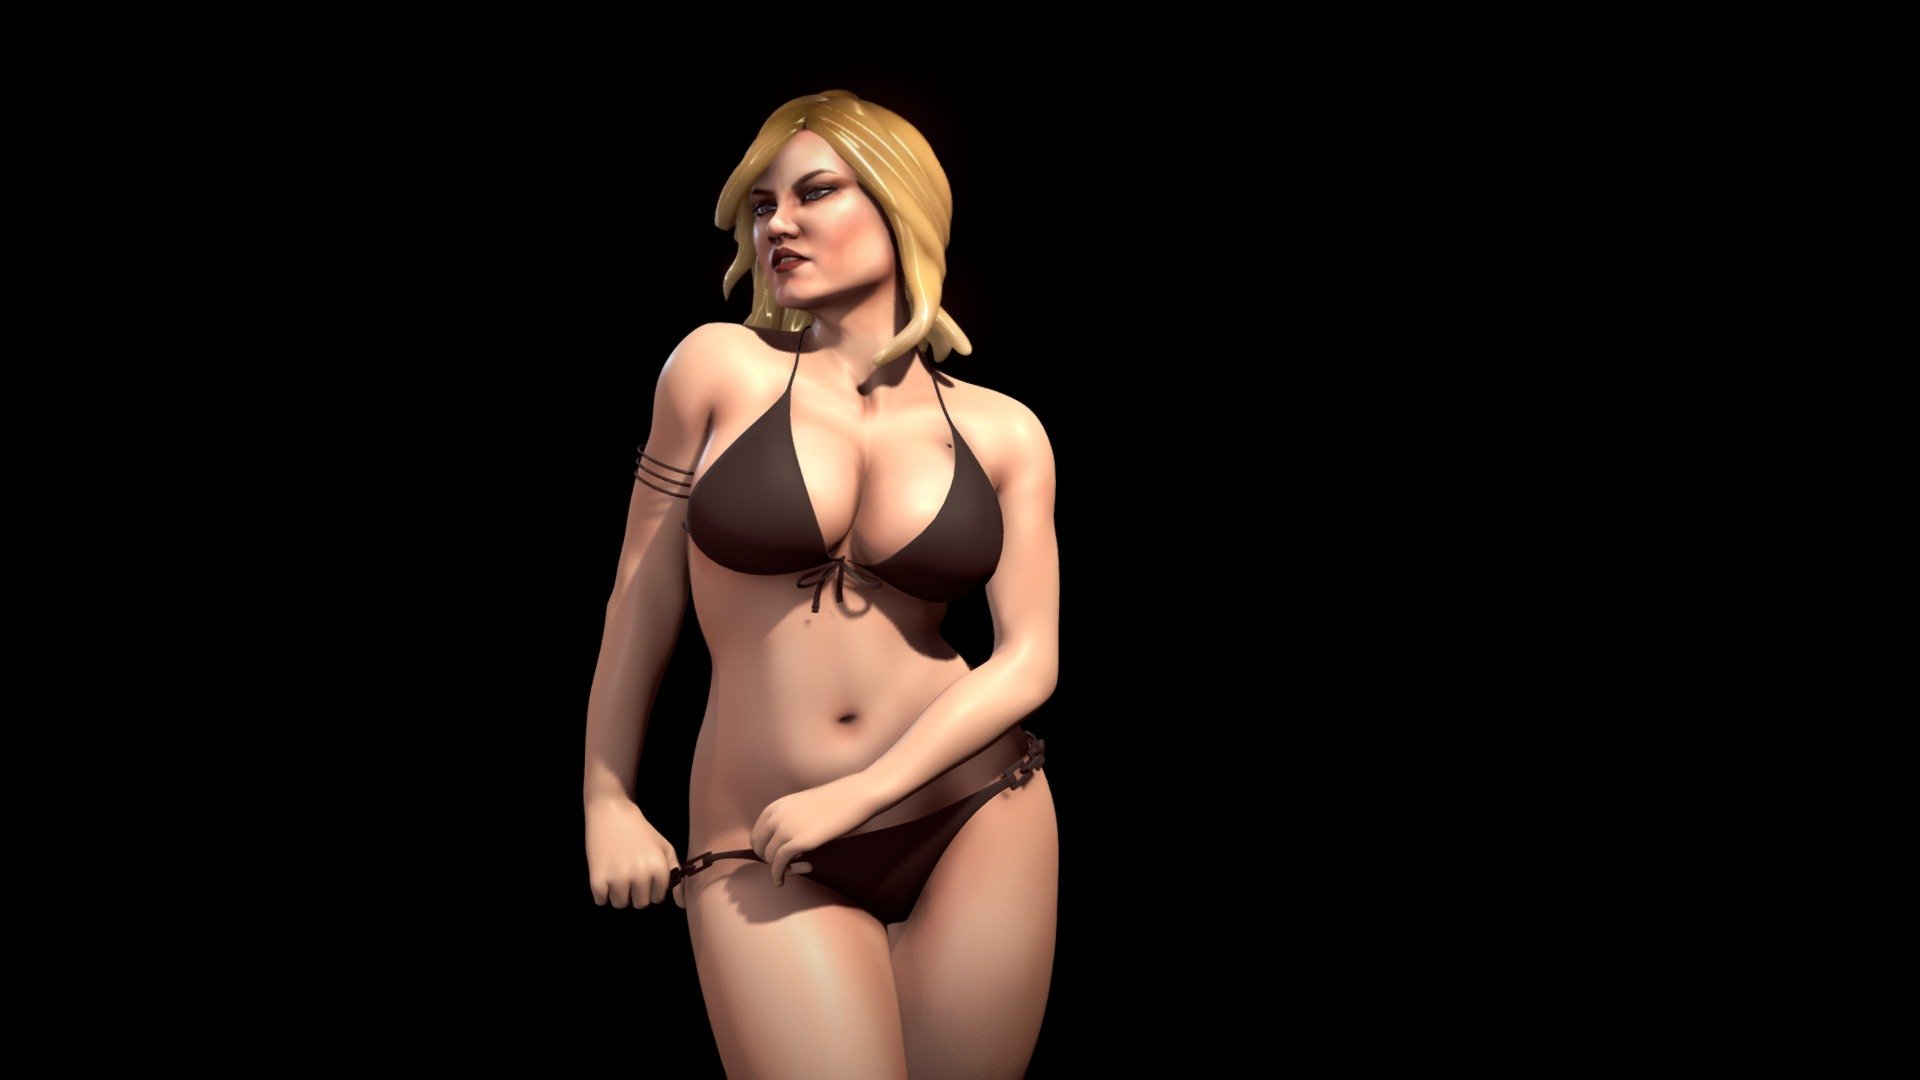 This is a 3D character that I made based on the stunning Brazilian model and actress Ellen Rocche 3d model